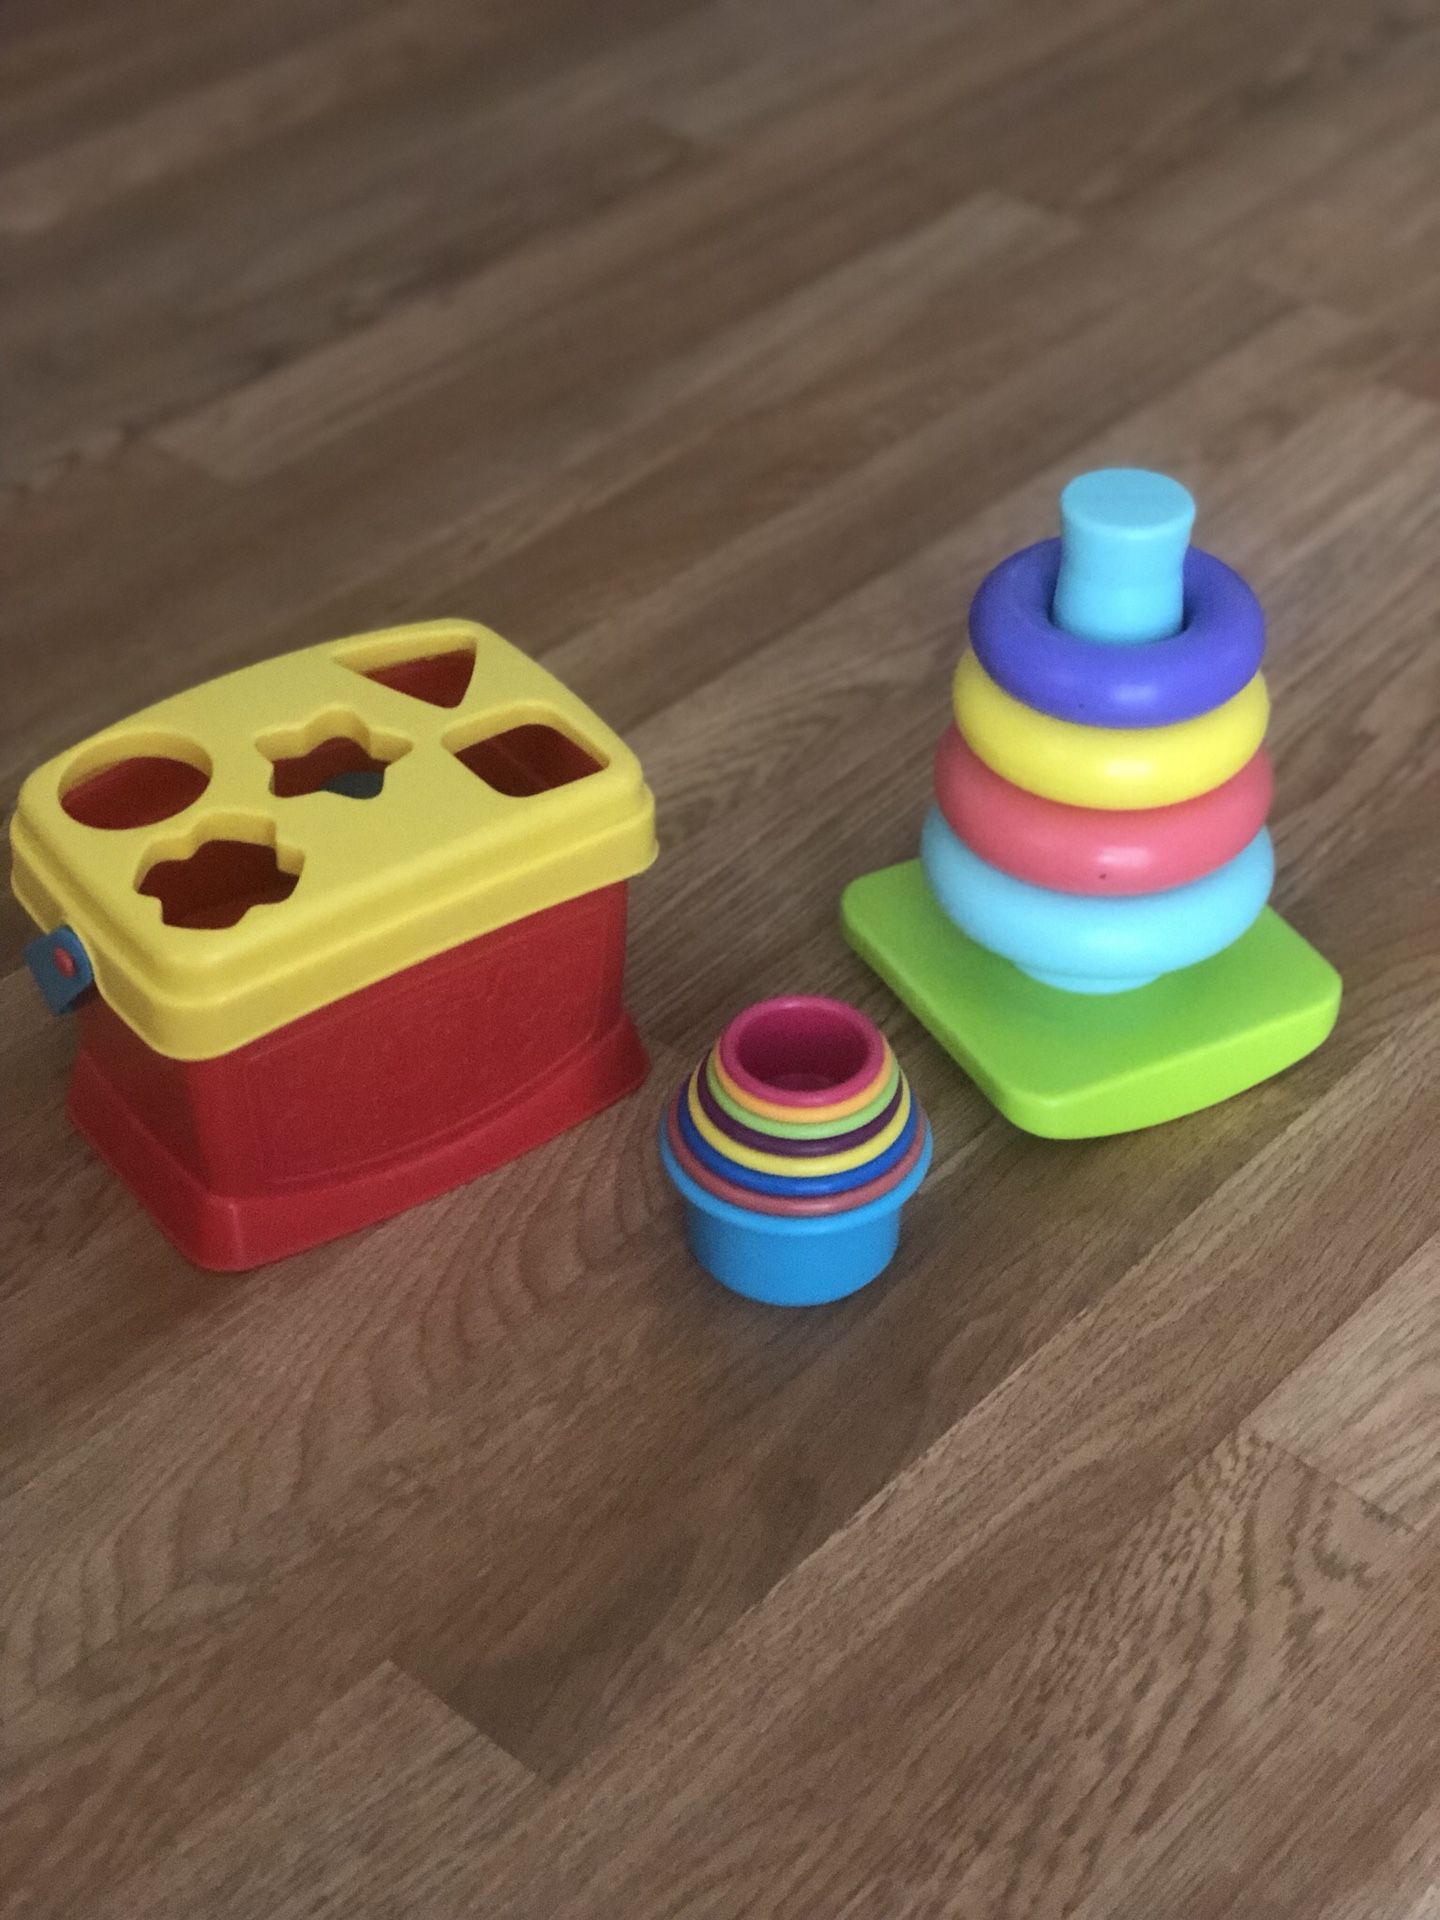 Toddler puzzle/learning games